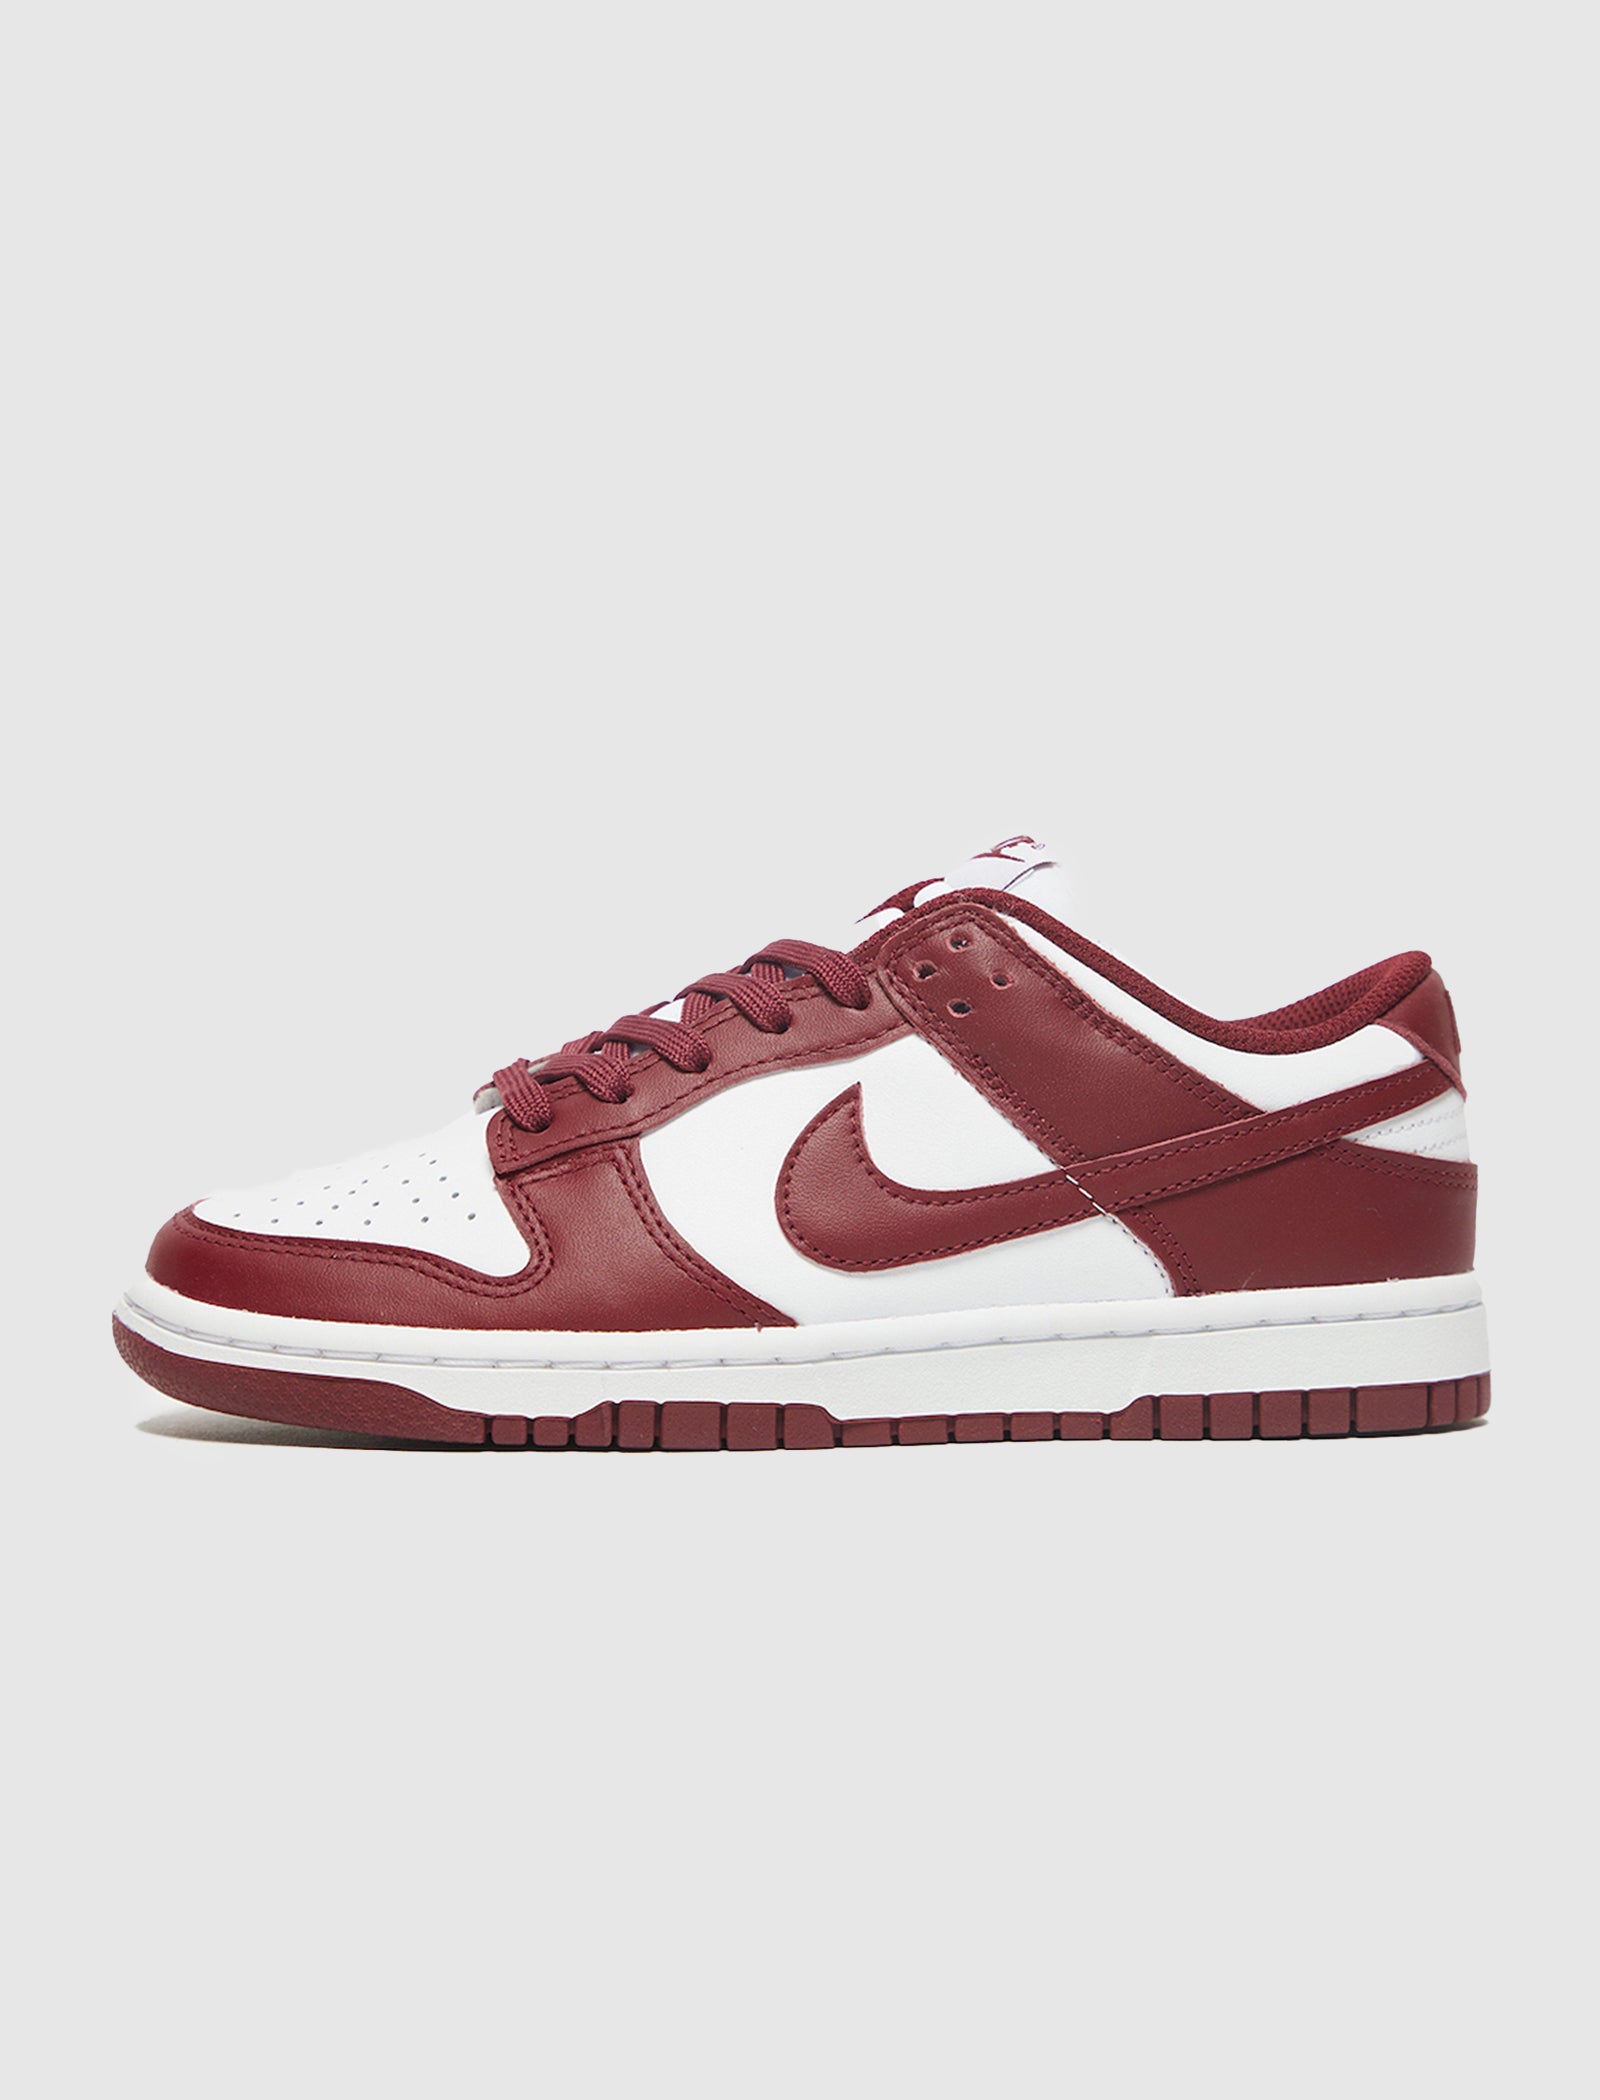 DUNK LOW "TEAM RED"